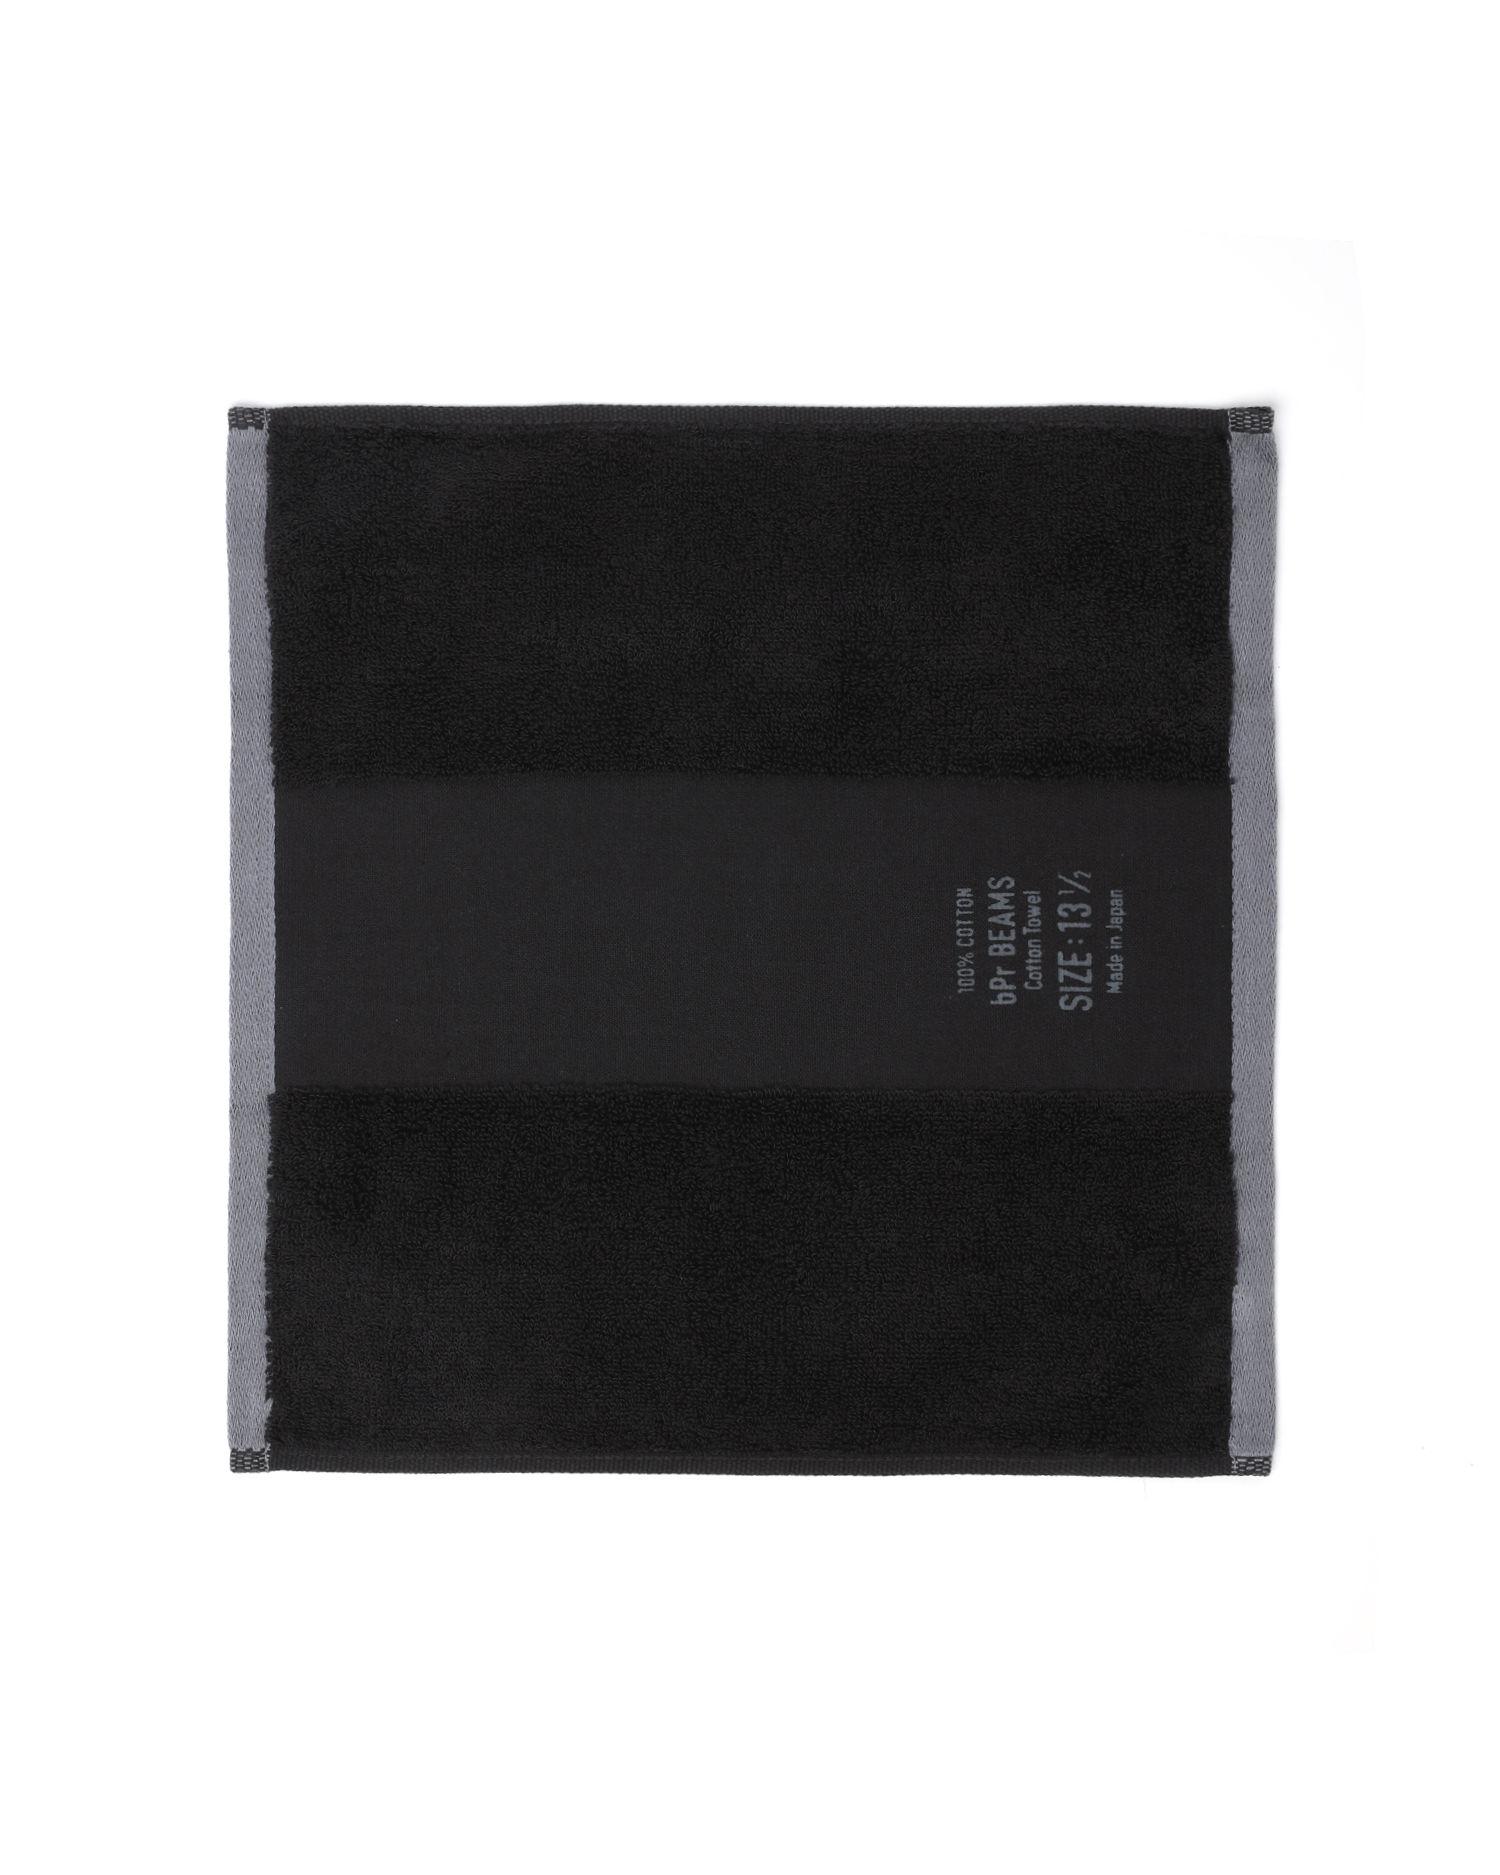 Cotton towel by BPR